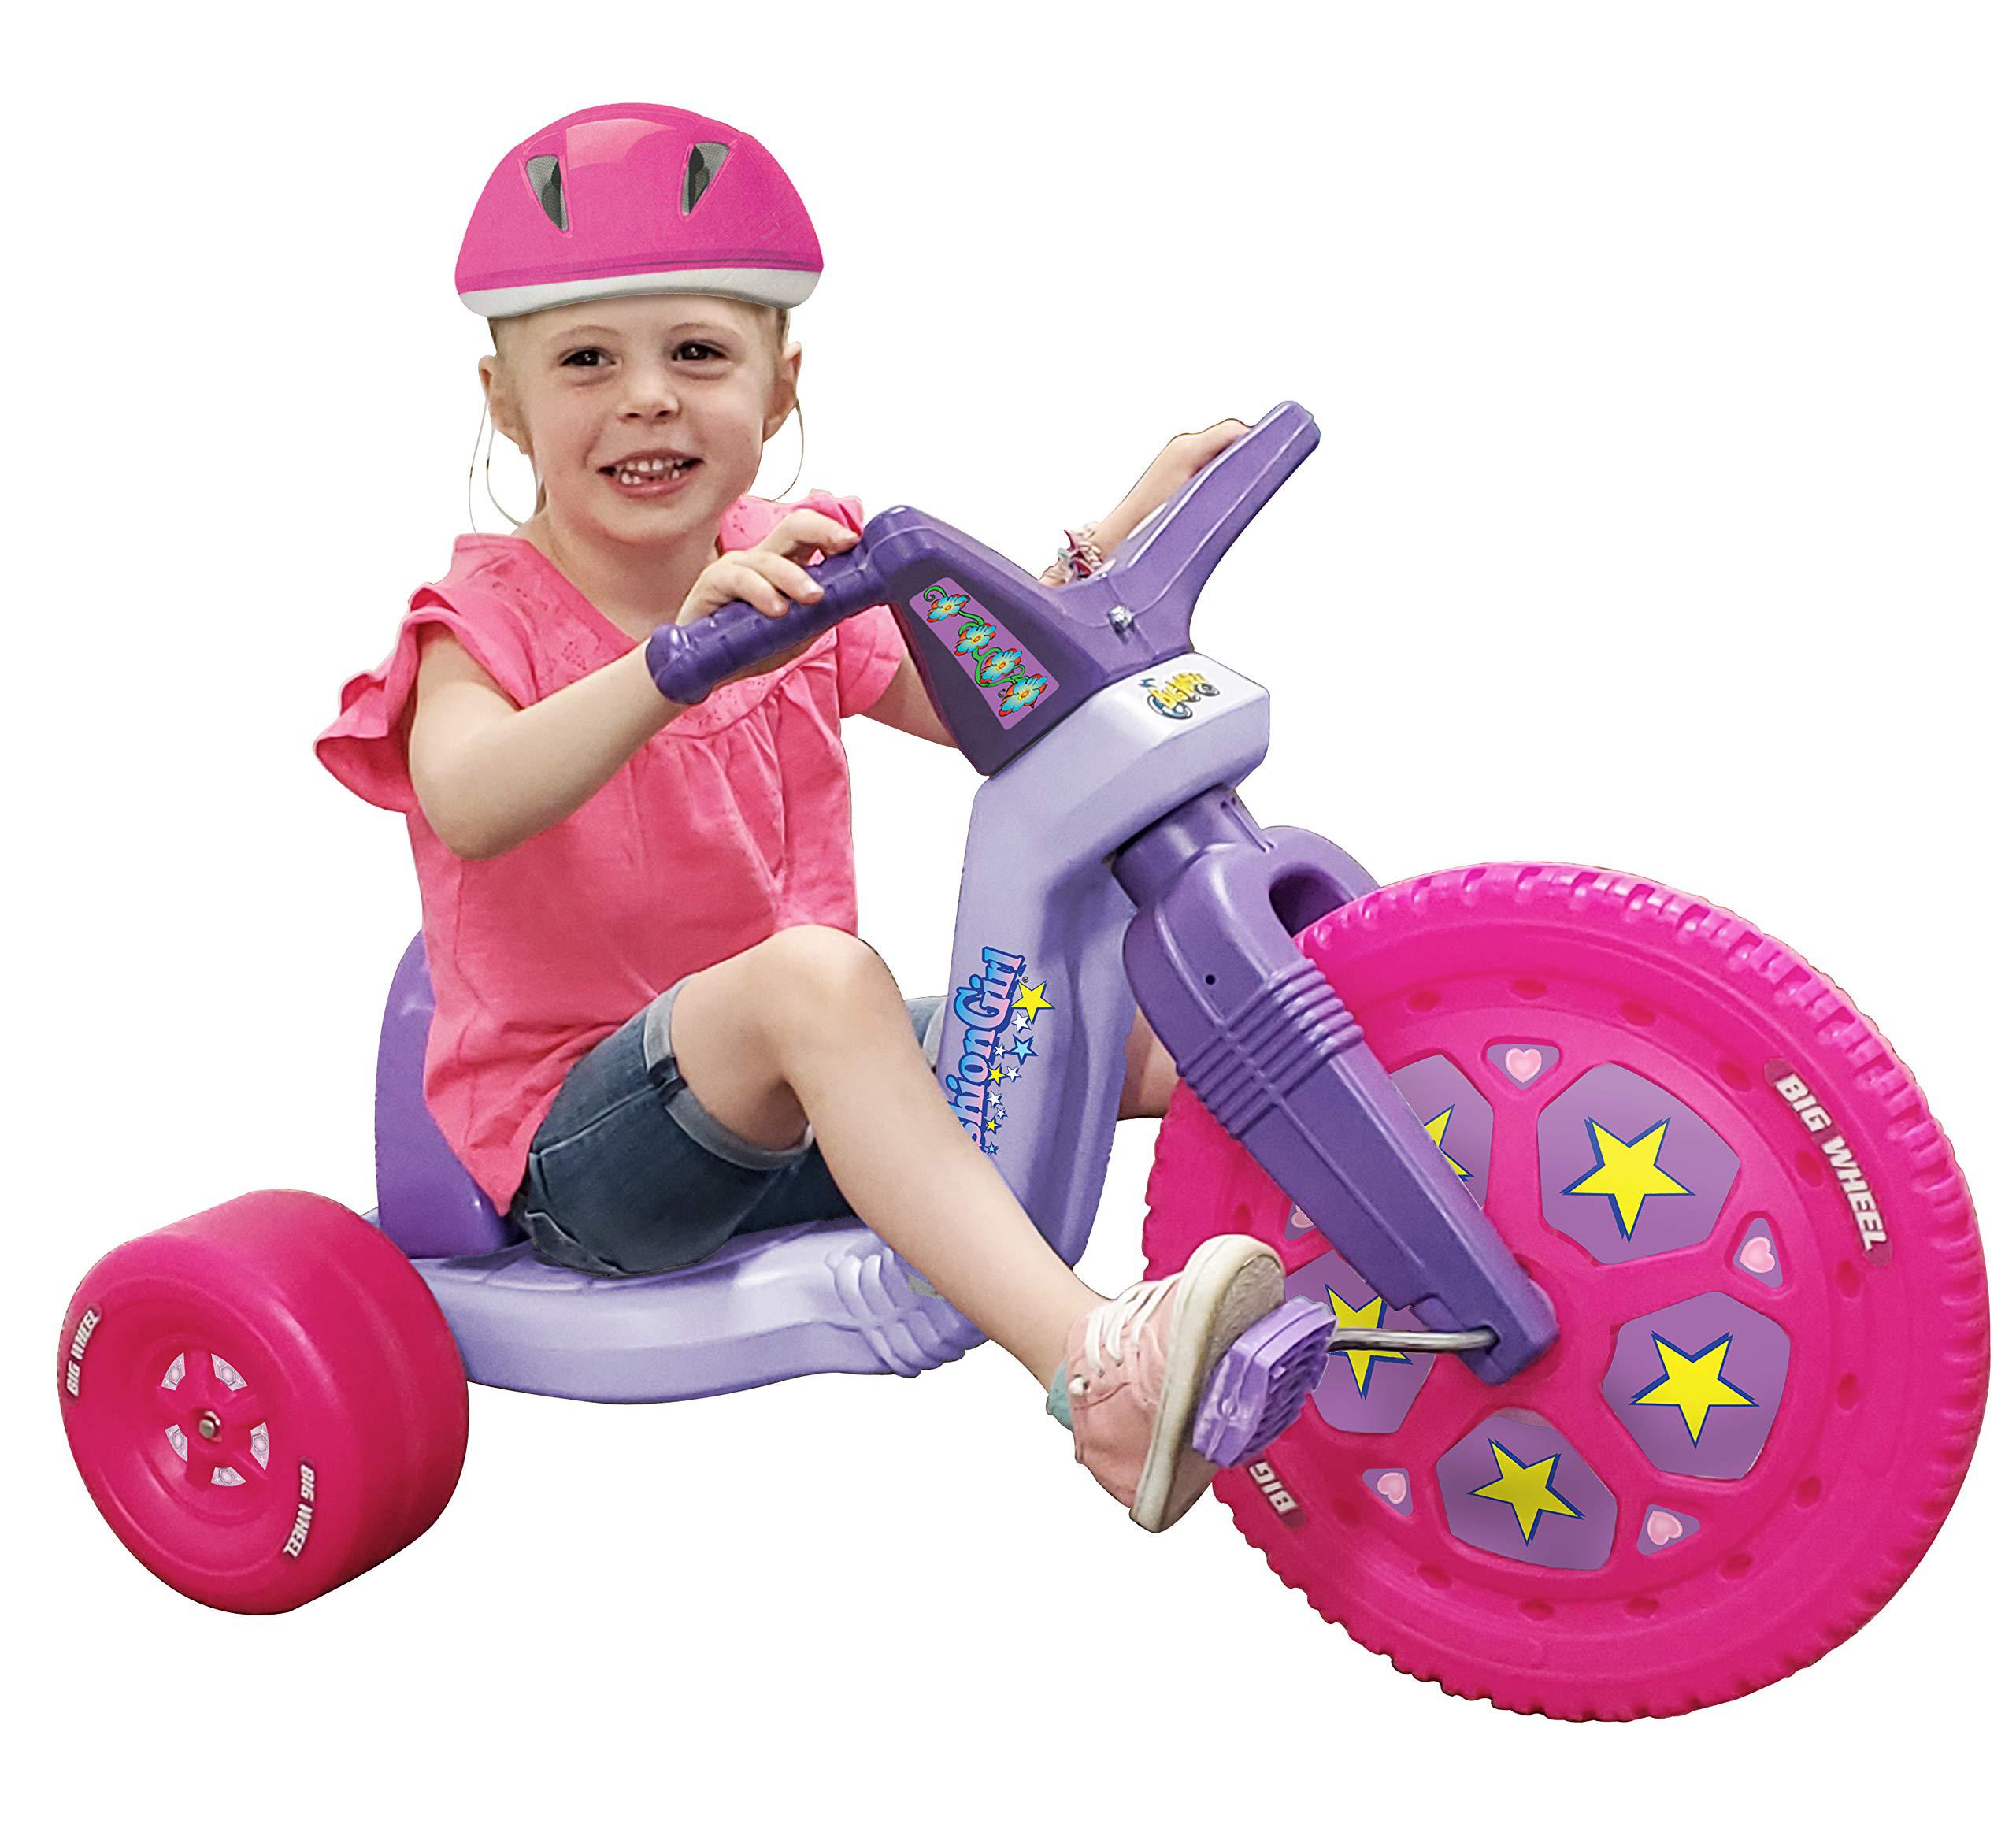 Big Wheels the original big wheel, pink-purple, giant 16" wheel ride on tricycle, 3 position seat - trike grows with child, kid powered 